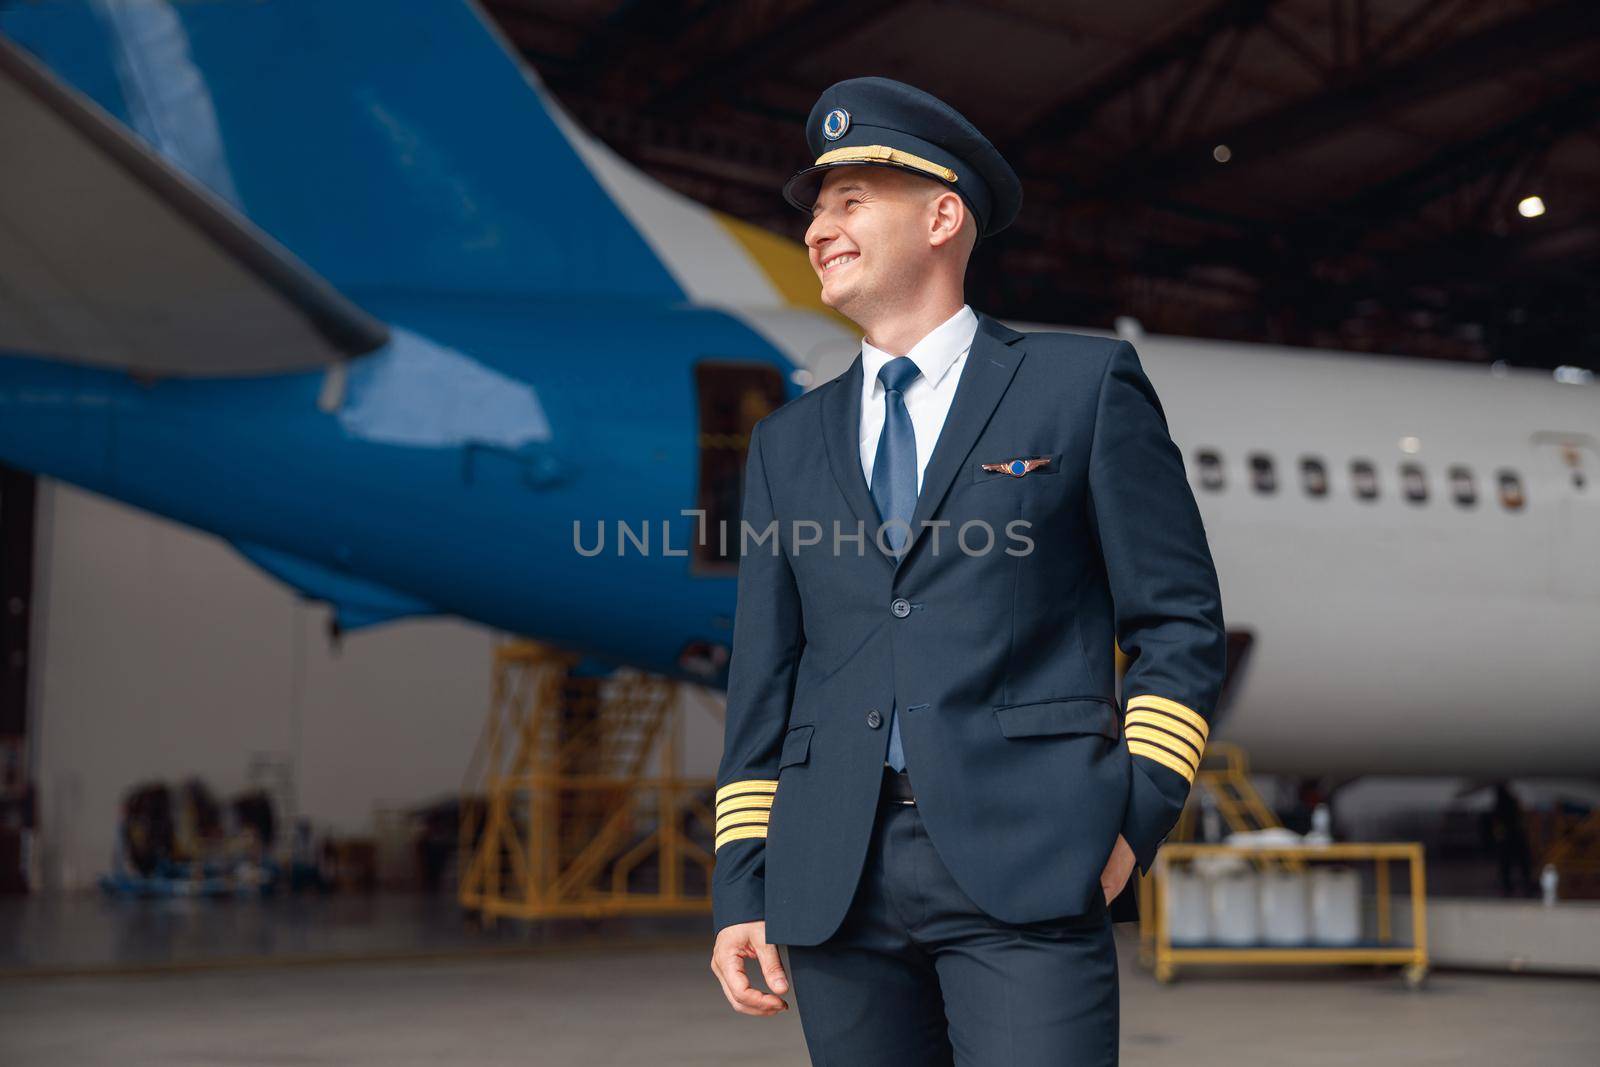 Cheerful pilot in uniform smiling away, standing in front of big passenger airplane in airport hangar. Aircraft, occupation, transportation concept